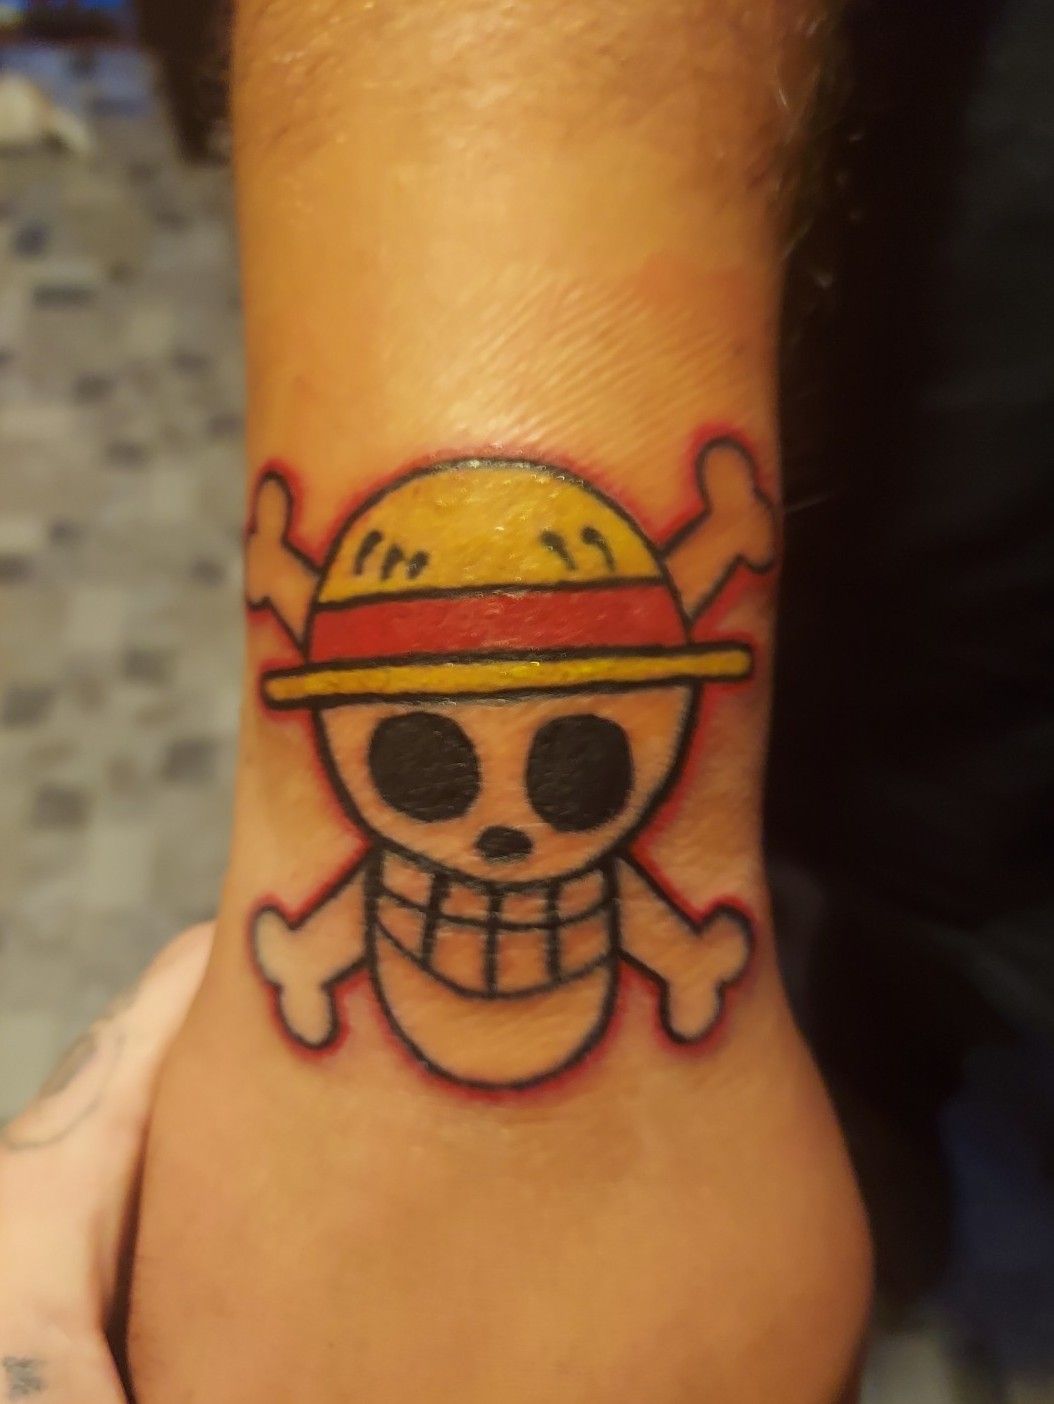 Tattoo Heroes Dublin  Here is a forced perspective tattoo of the one piece  character luffy enjoyed it a lot  Facebook